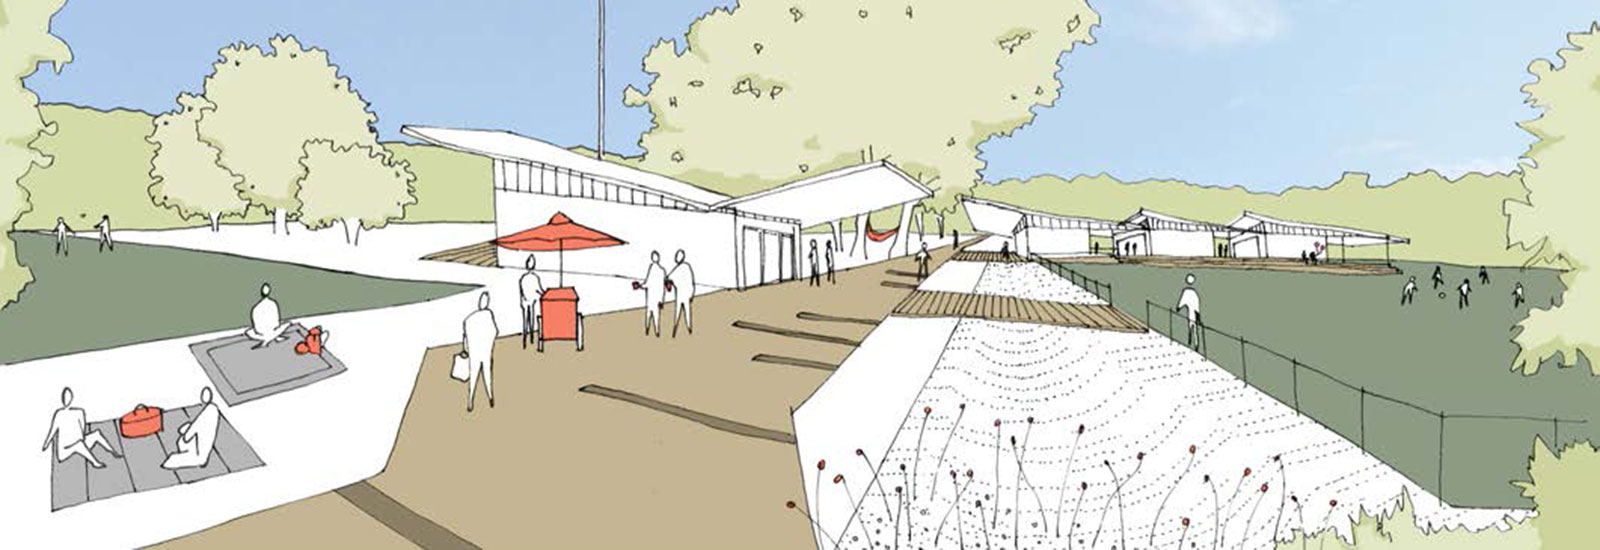 Concept design from the Tomaree Sports Complex Masterplan